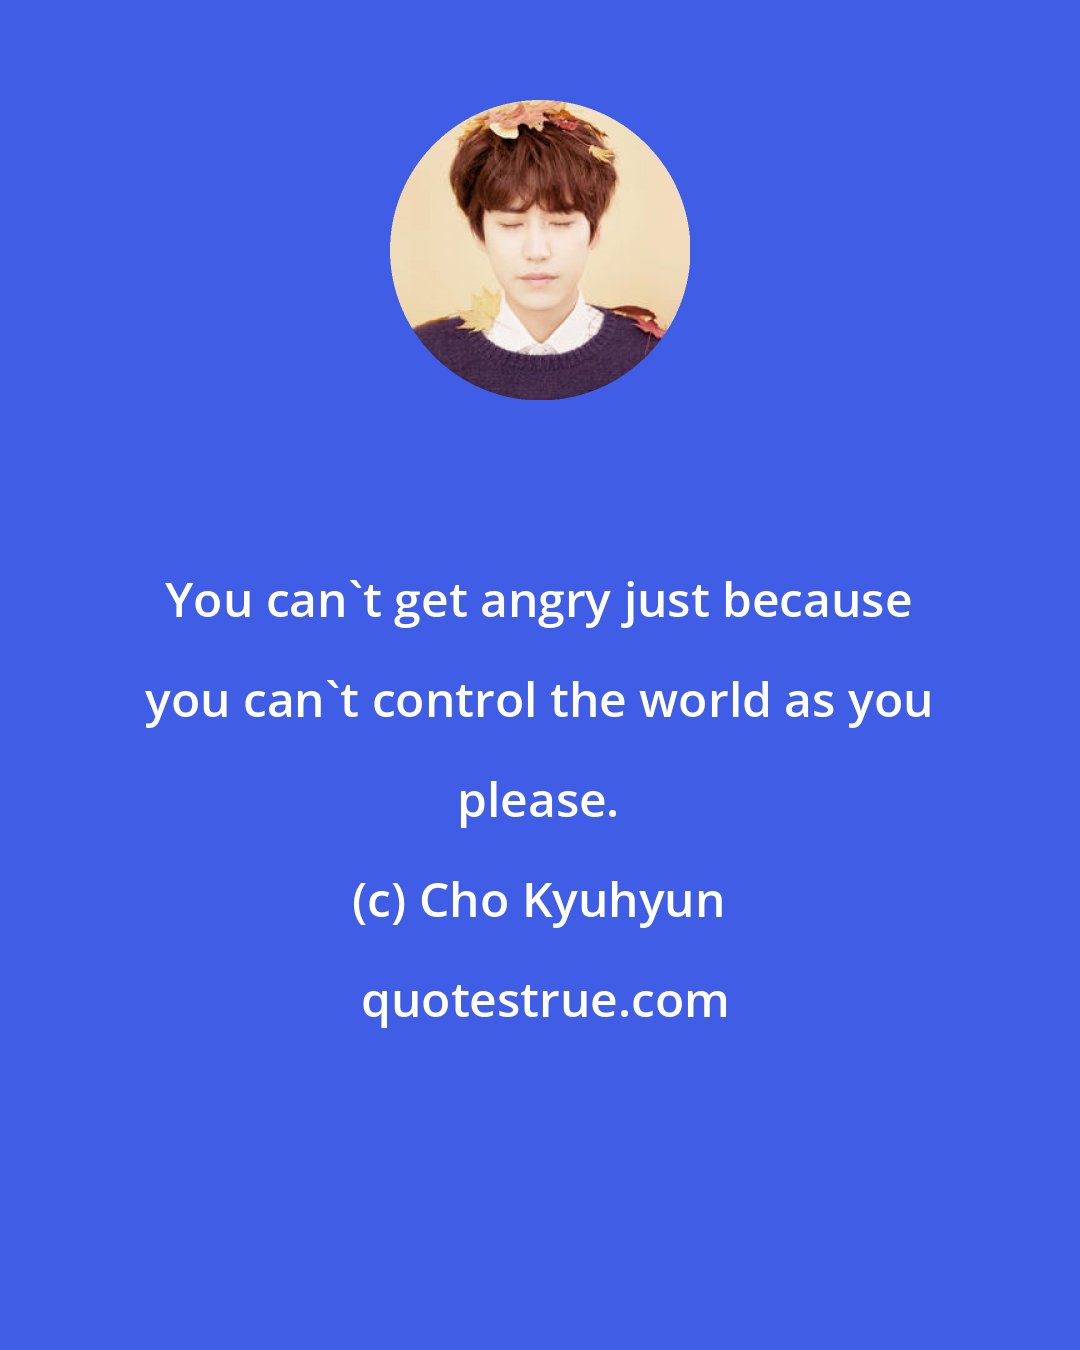 Cho Kyuhyun: You can't get angry just because you can't control the world as you please.